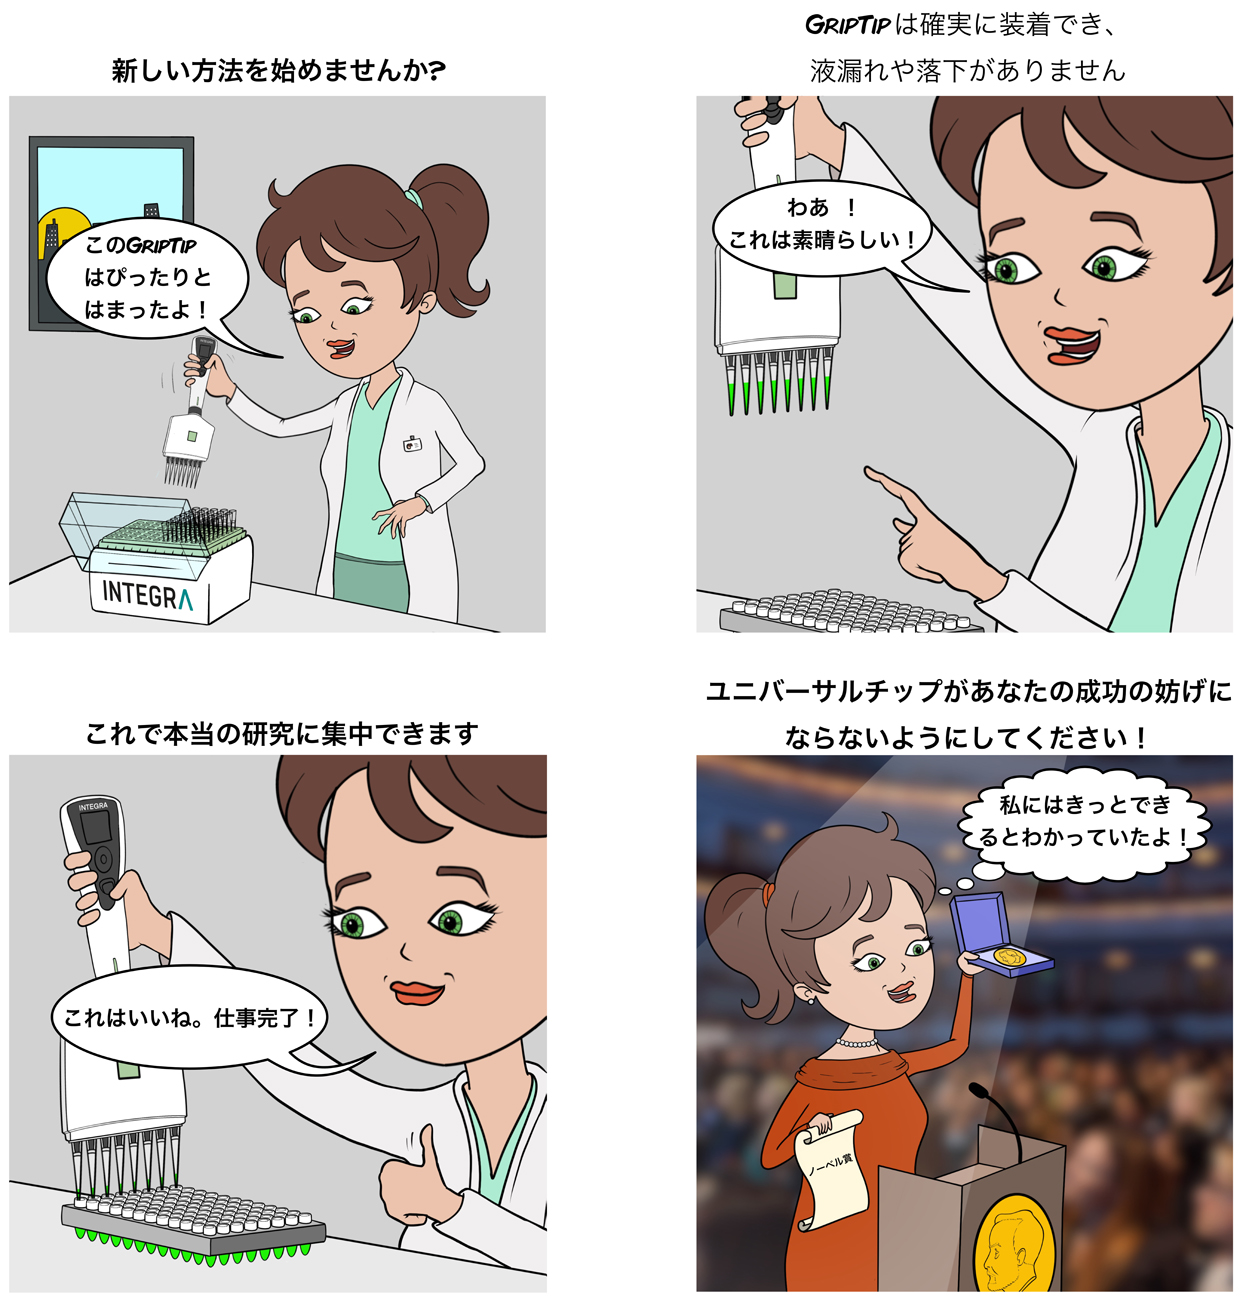 Cartoon of a scientist working with GripTip pipette tips and winning the nobel prize